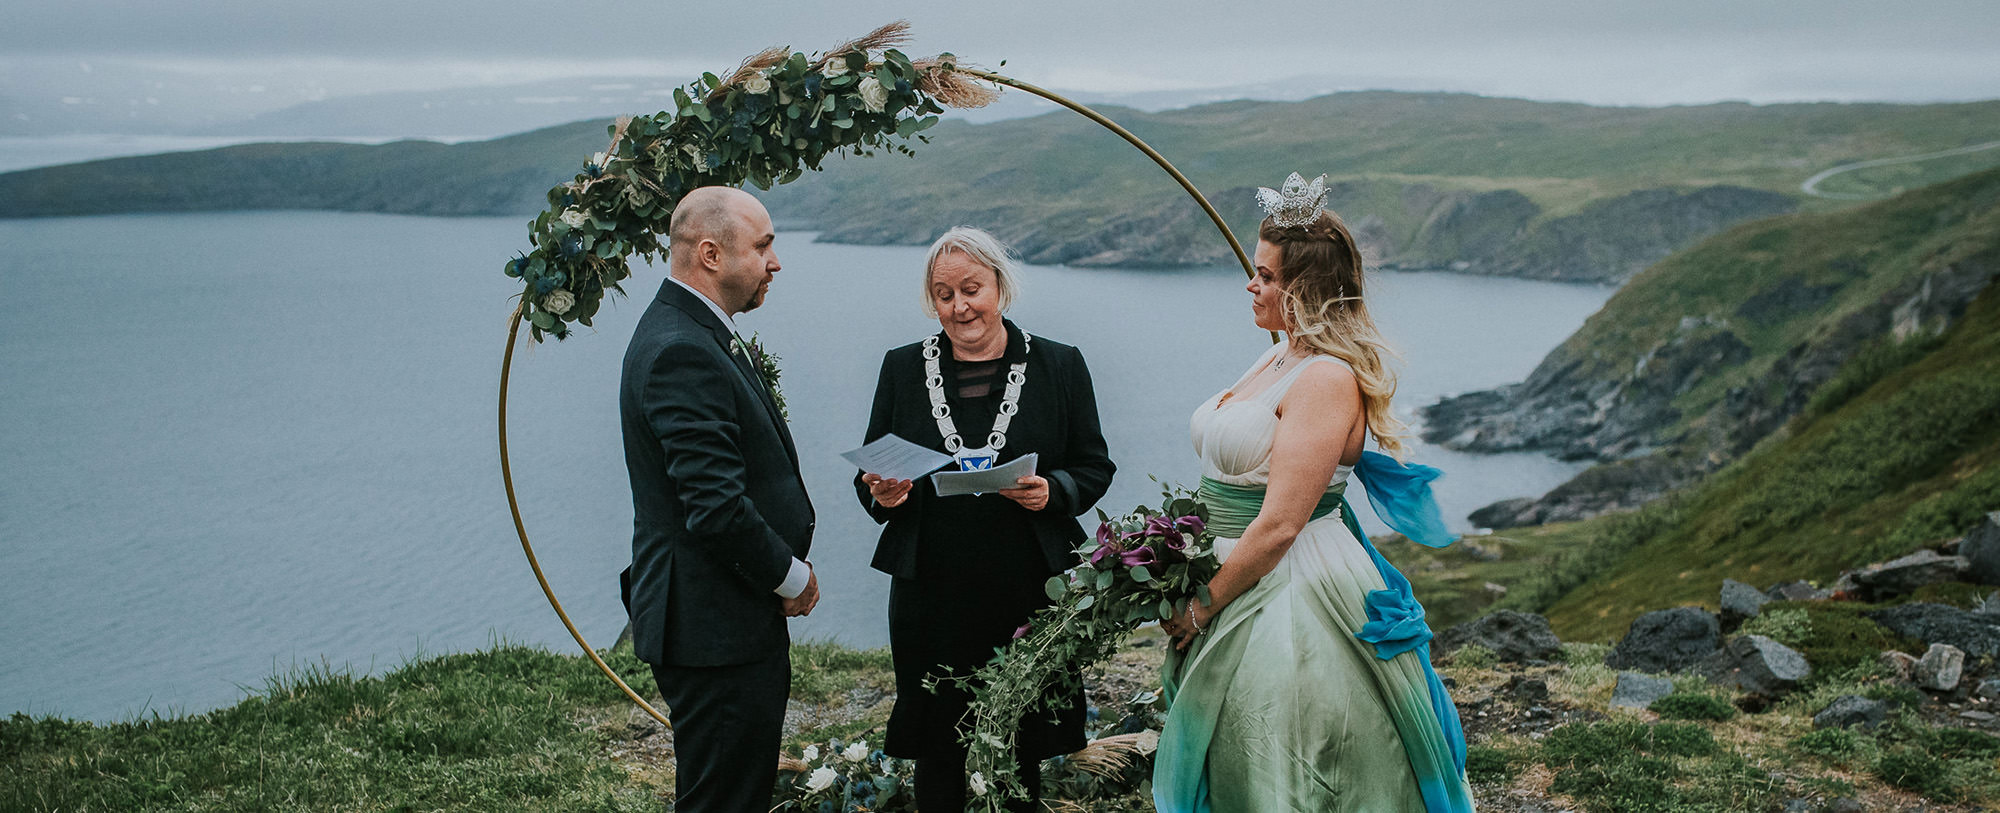 Gorgeous elopement ceremony on a distand island in Northern Norway. Bride is wearing a blue green dress and they are standing in front of a circular flower arch on their elopement day in Sørøya